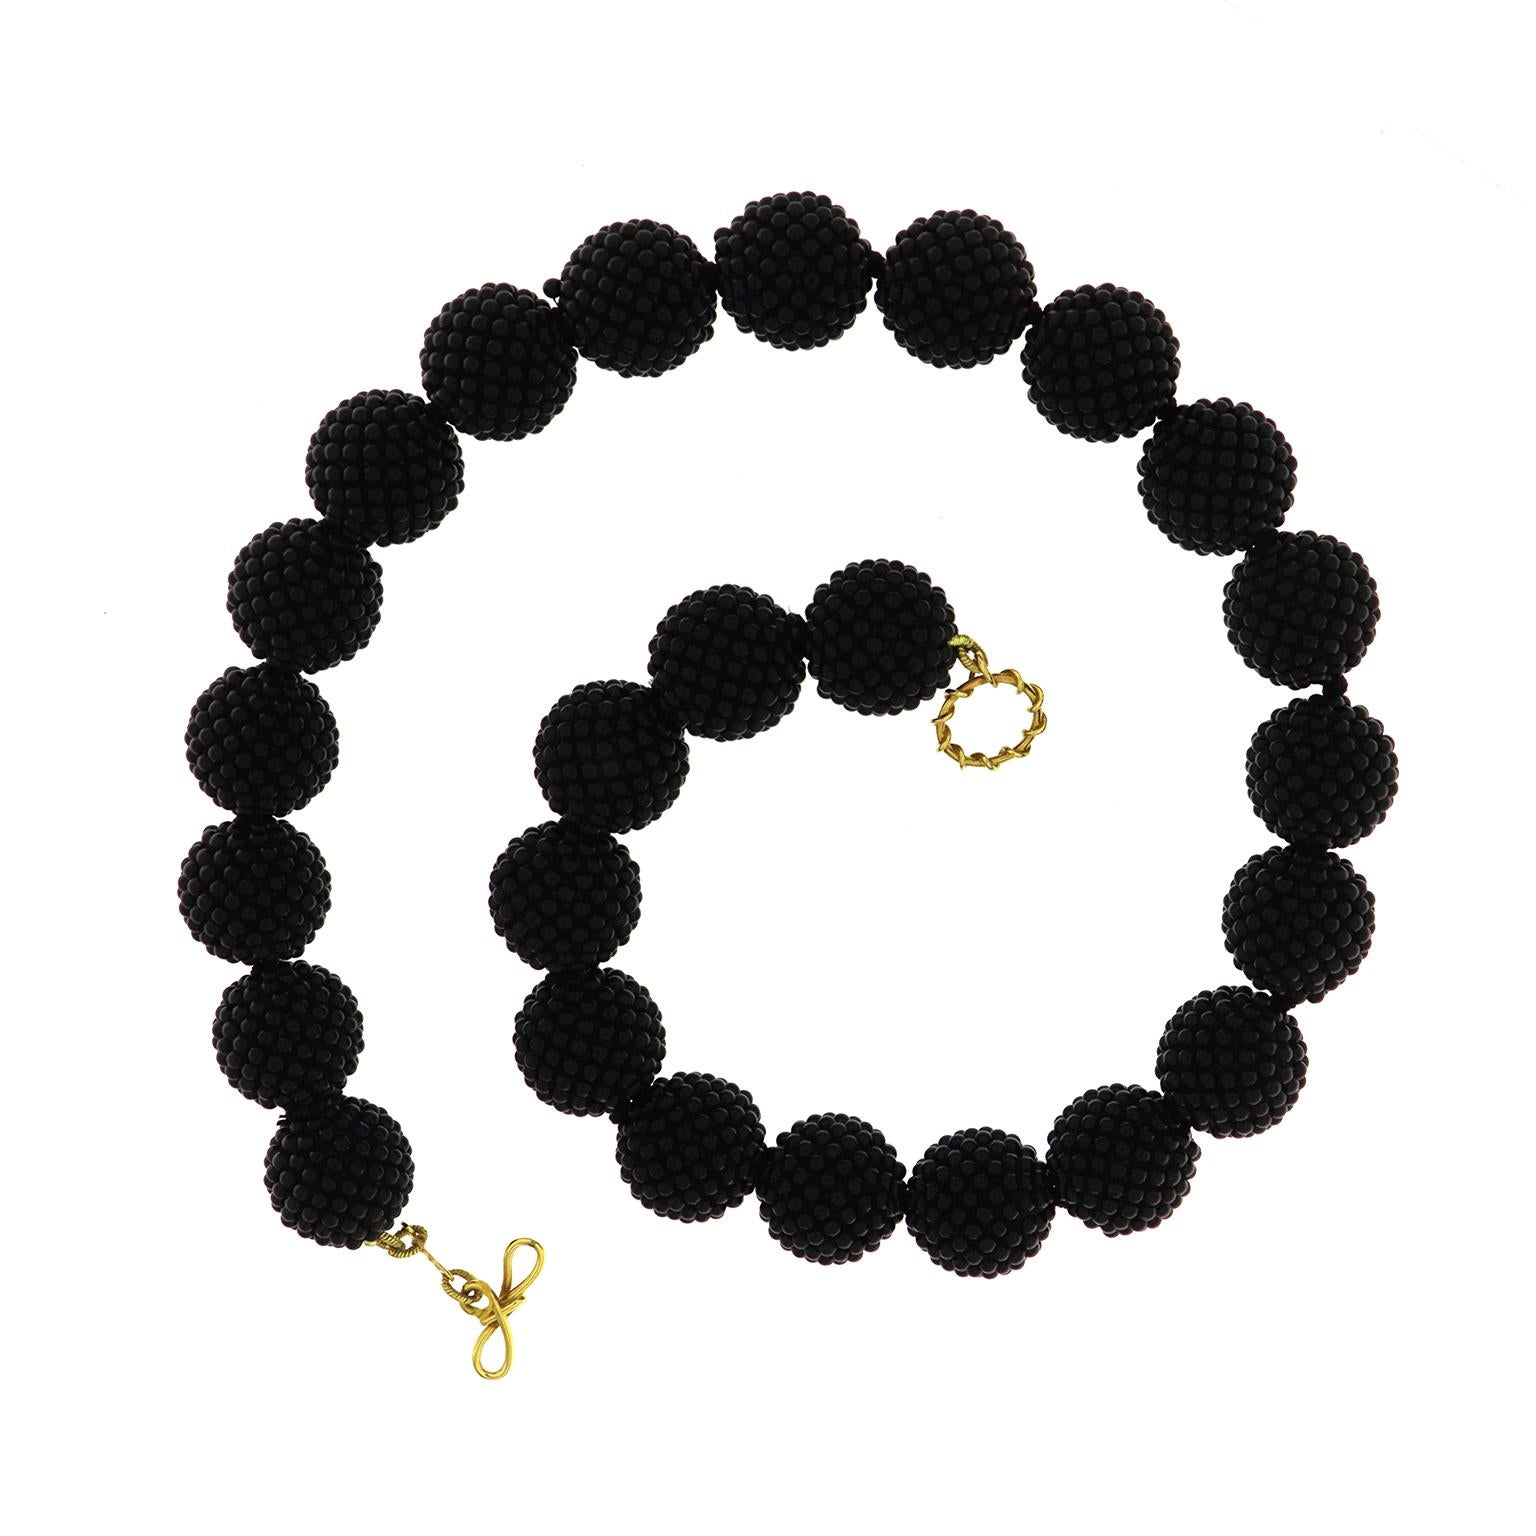 Valentin Magro Black Onyx Woven Ball Necklace boast complex beads. Tiny black onyx pieces are woven into balls 18mm large, creating a textured surface. There are 25 balls in the necklace. An 18k yellow gold knot and toggle clasp fastens the